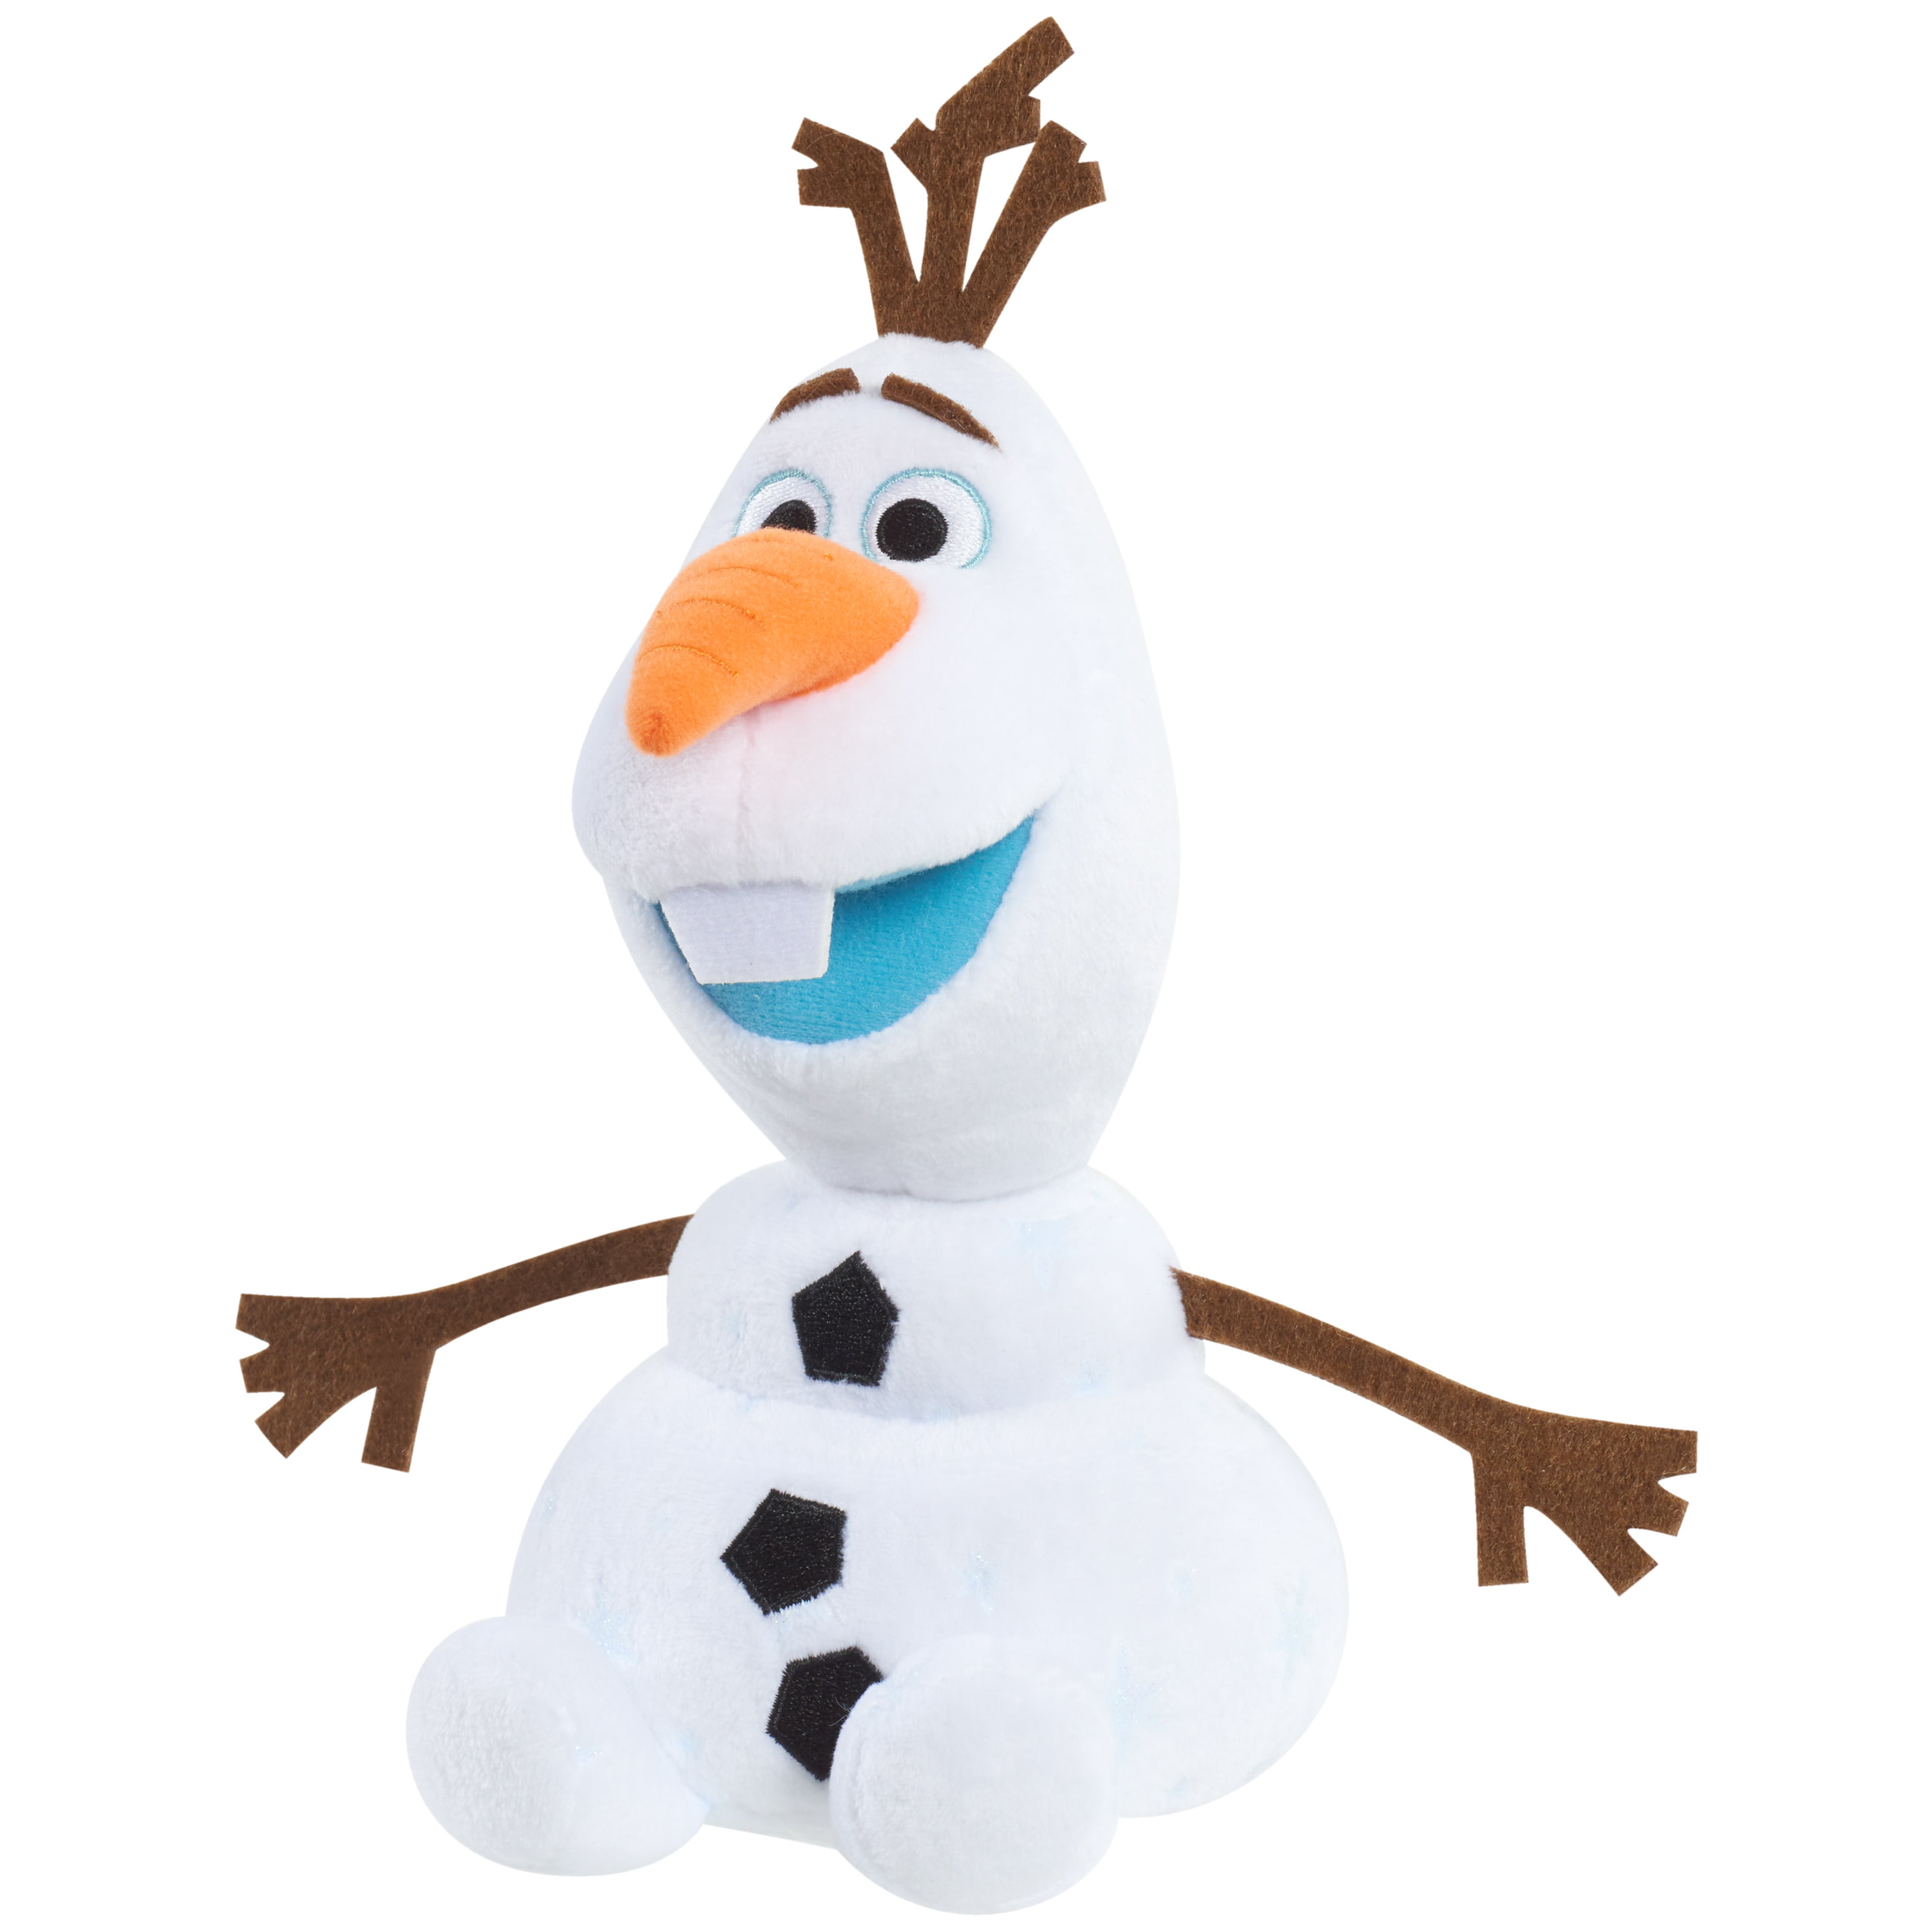 DISNEY FROZEN GIFT QUALITY 10" OLAF SOFT TOY WITH HAT NEW & BOXED 26CM 